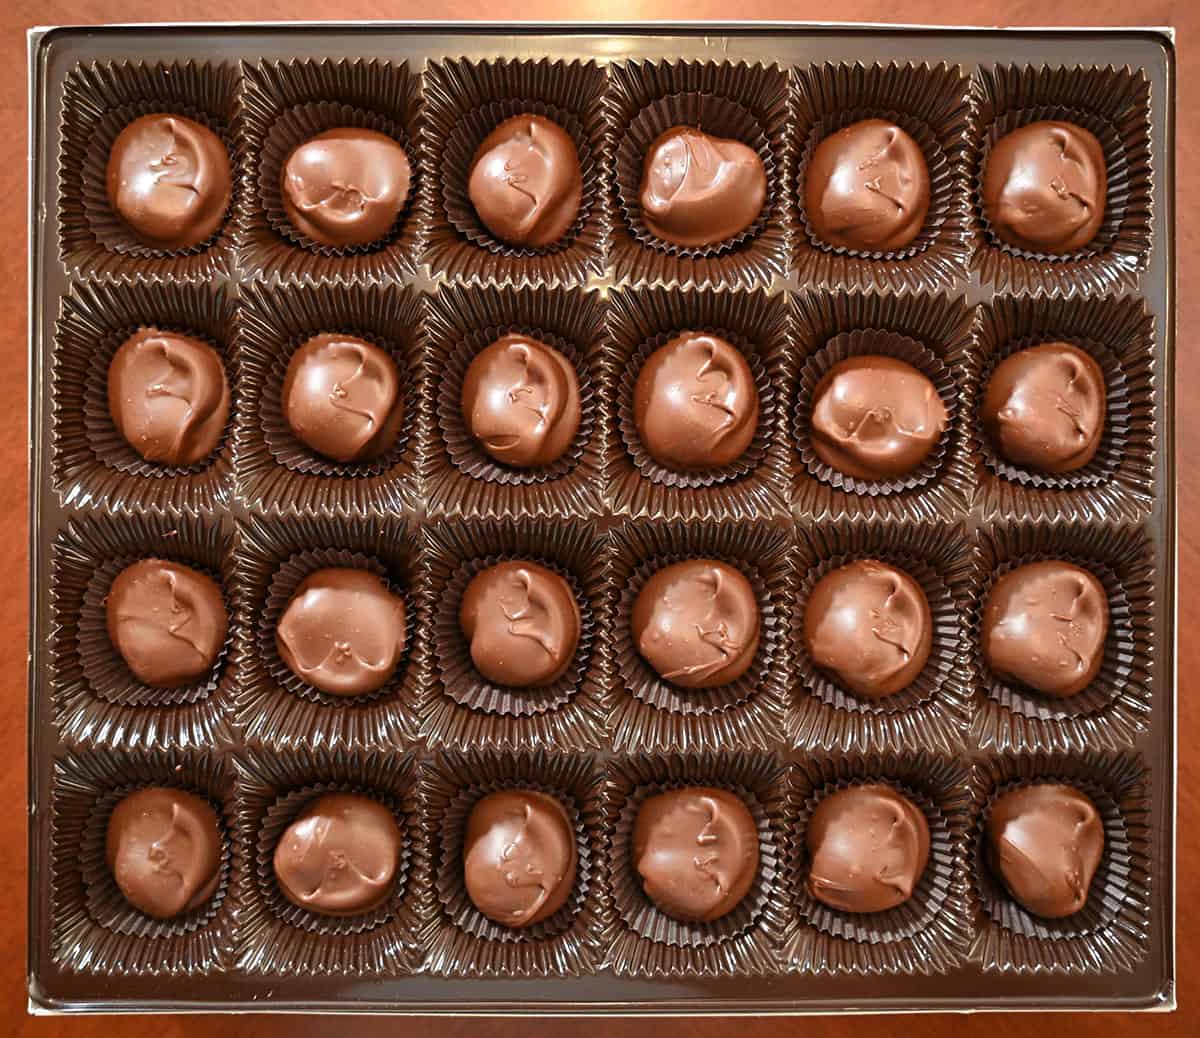 Image of the box of chocolate covered macadamia nuts with the lid off so you can see all the chocolates laying in the box.